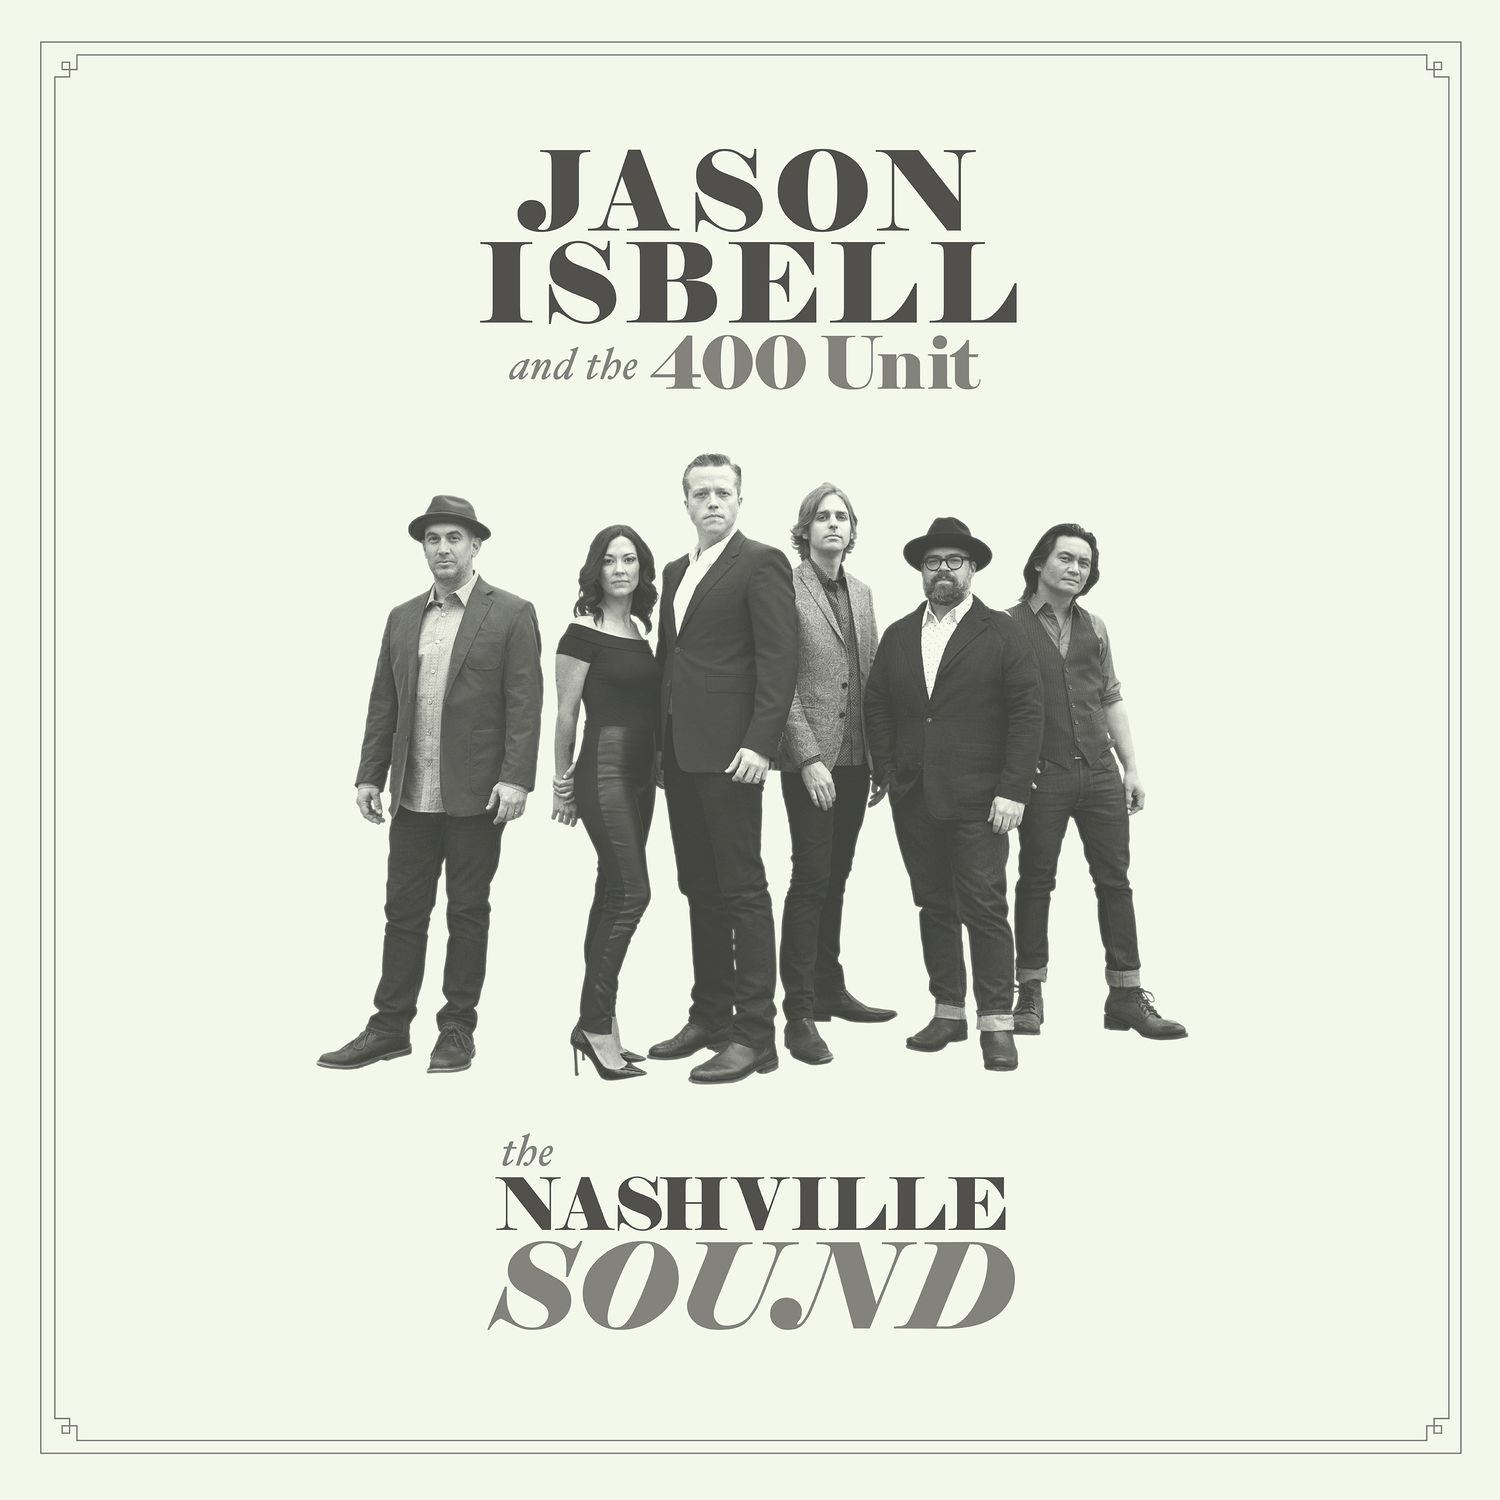 Art for Cumberland Gap by Jason Isbell and the 400 Unit